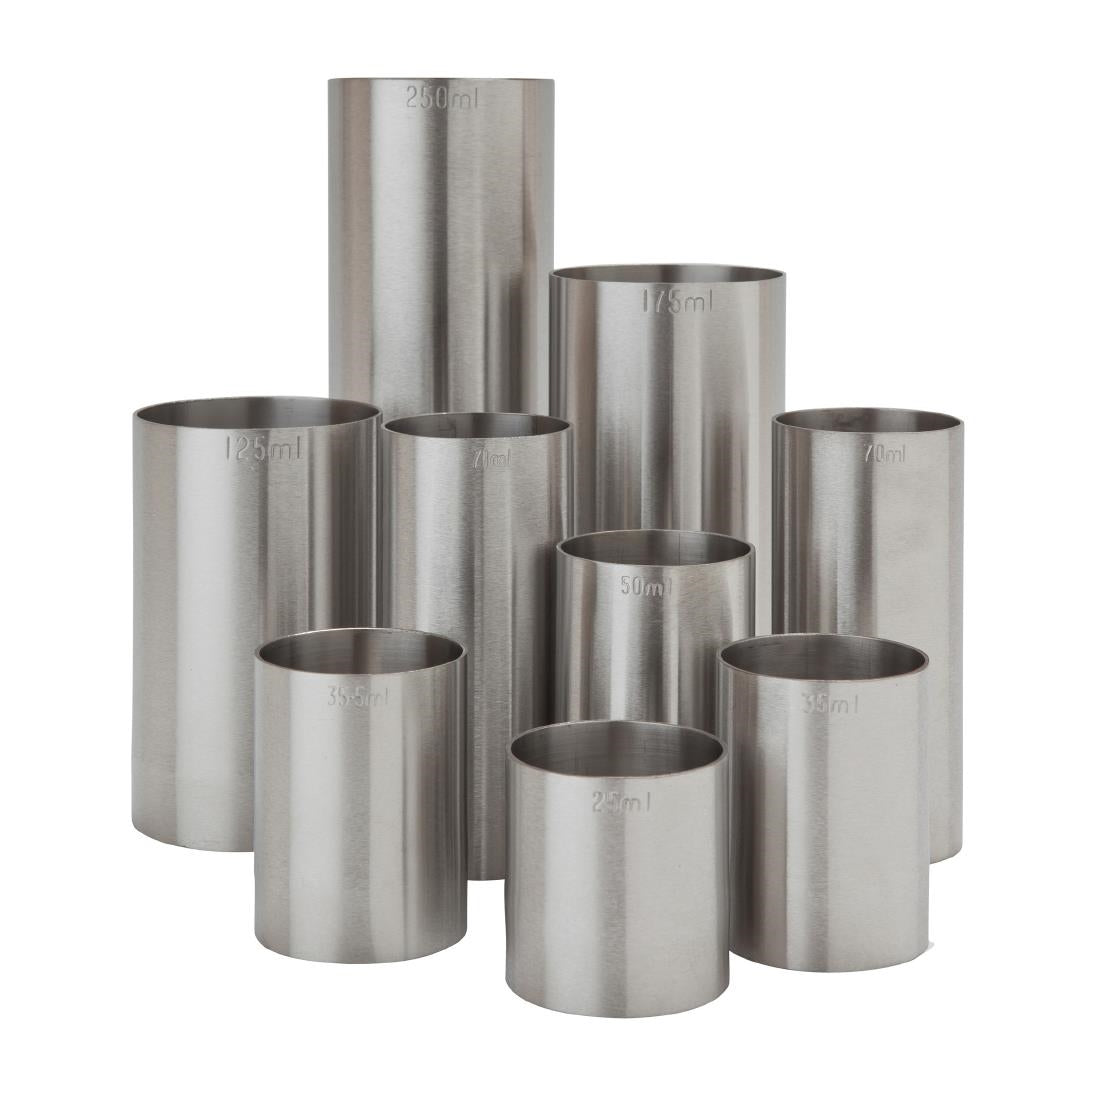 CJ447 Beaumont Stainless Steel Thimble Measure CE Marked 200ml JD Catering Equipment Solutions Ltd